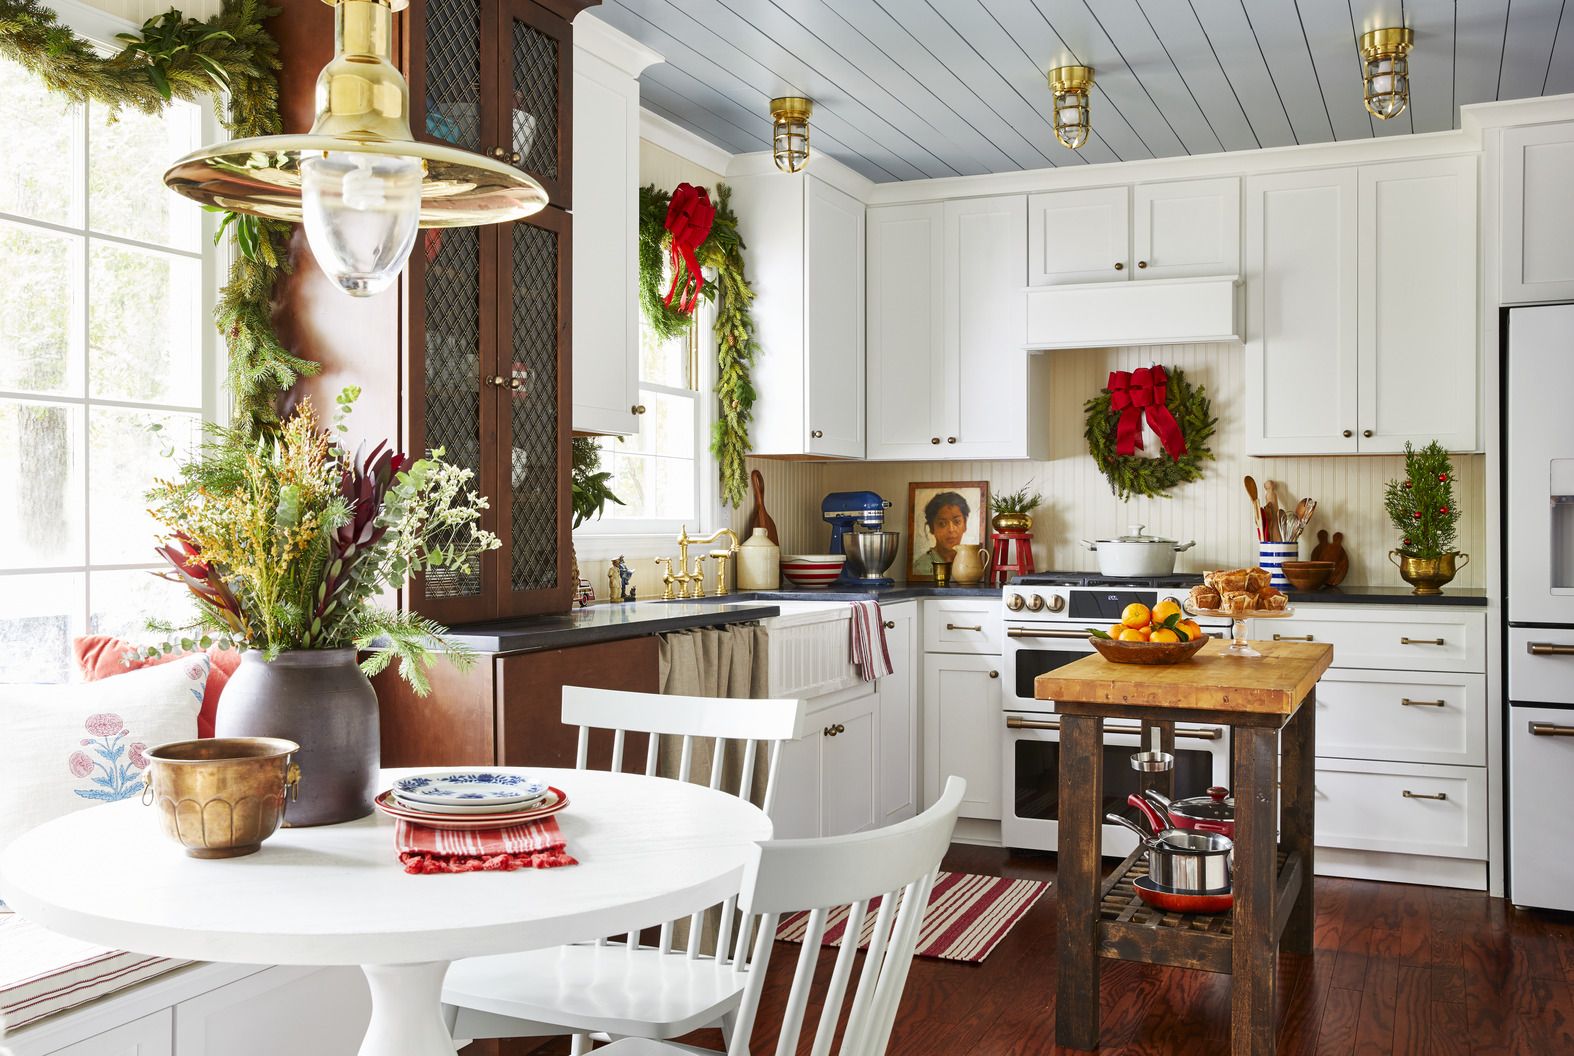 18 Kitchen Christmas Decorating Ideas   How to Decorate Your ...